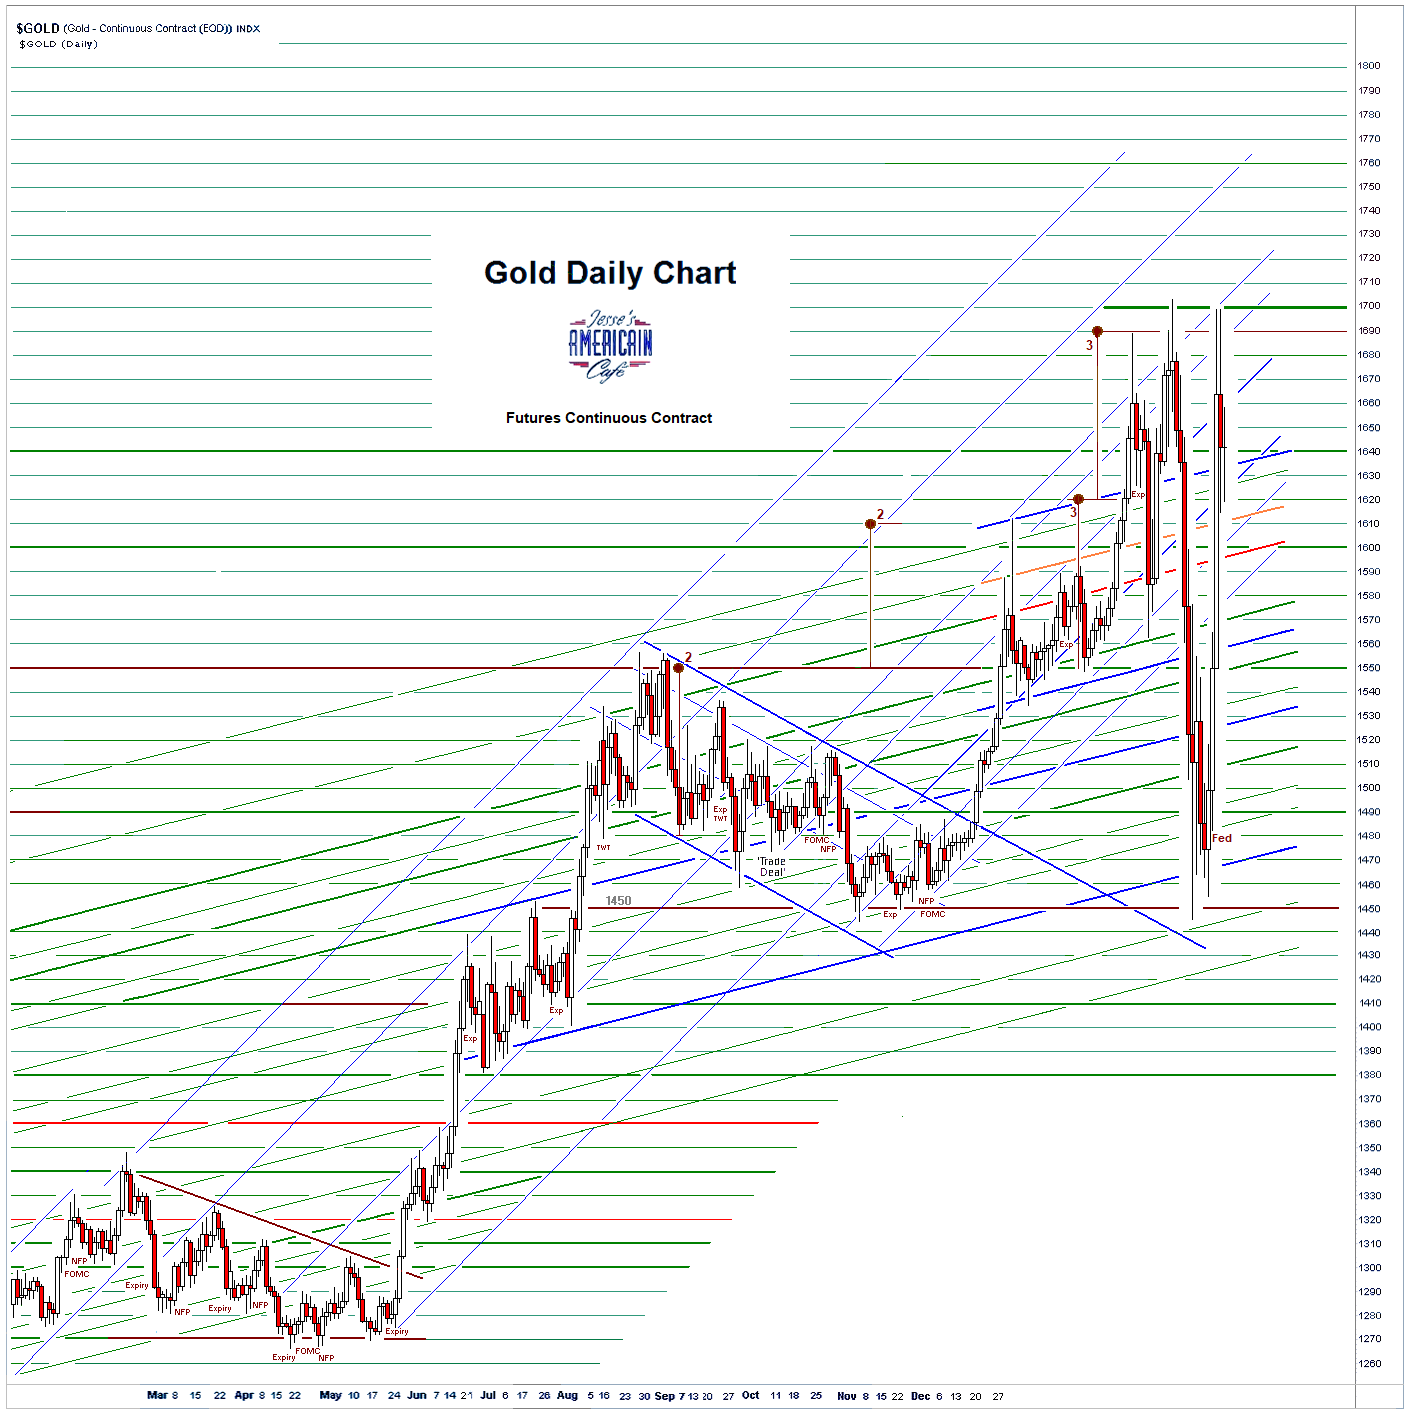 golddaily8 26-03-2020.PNG